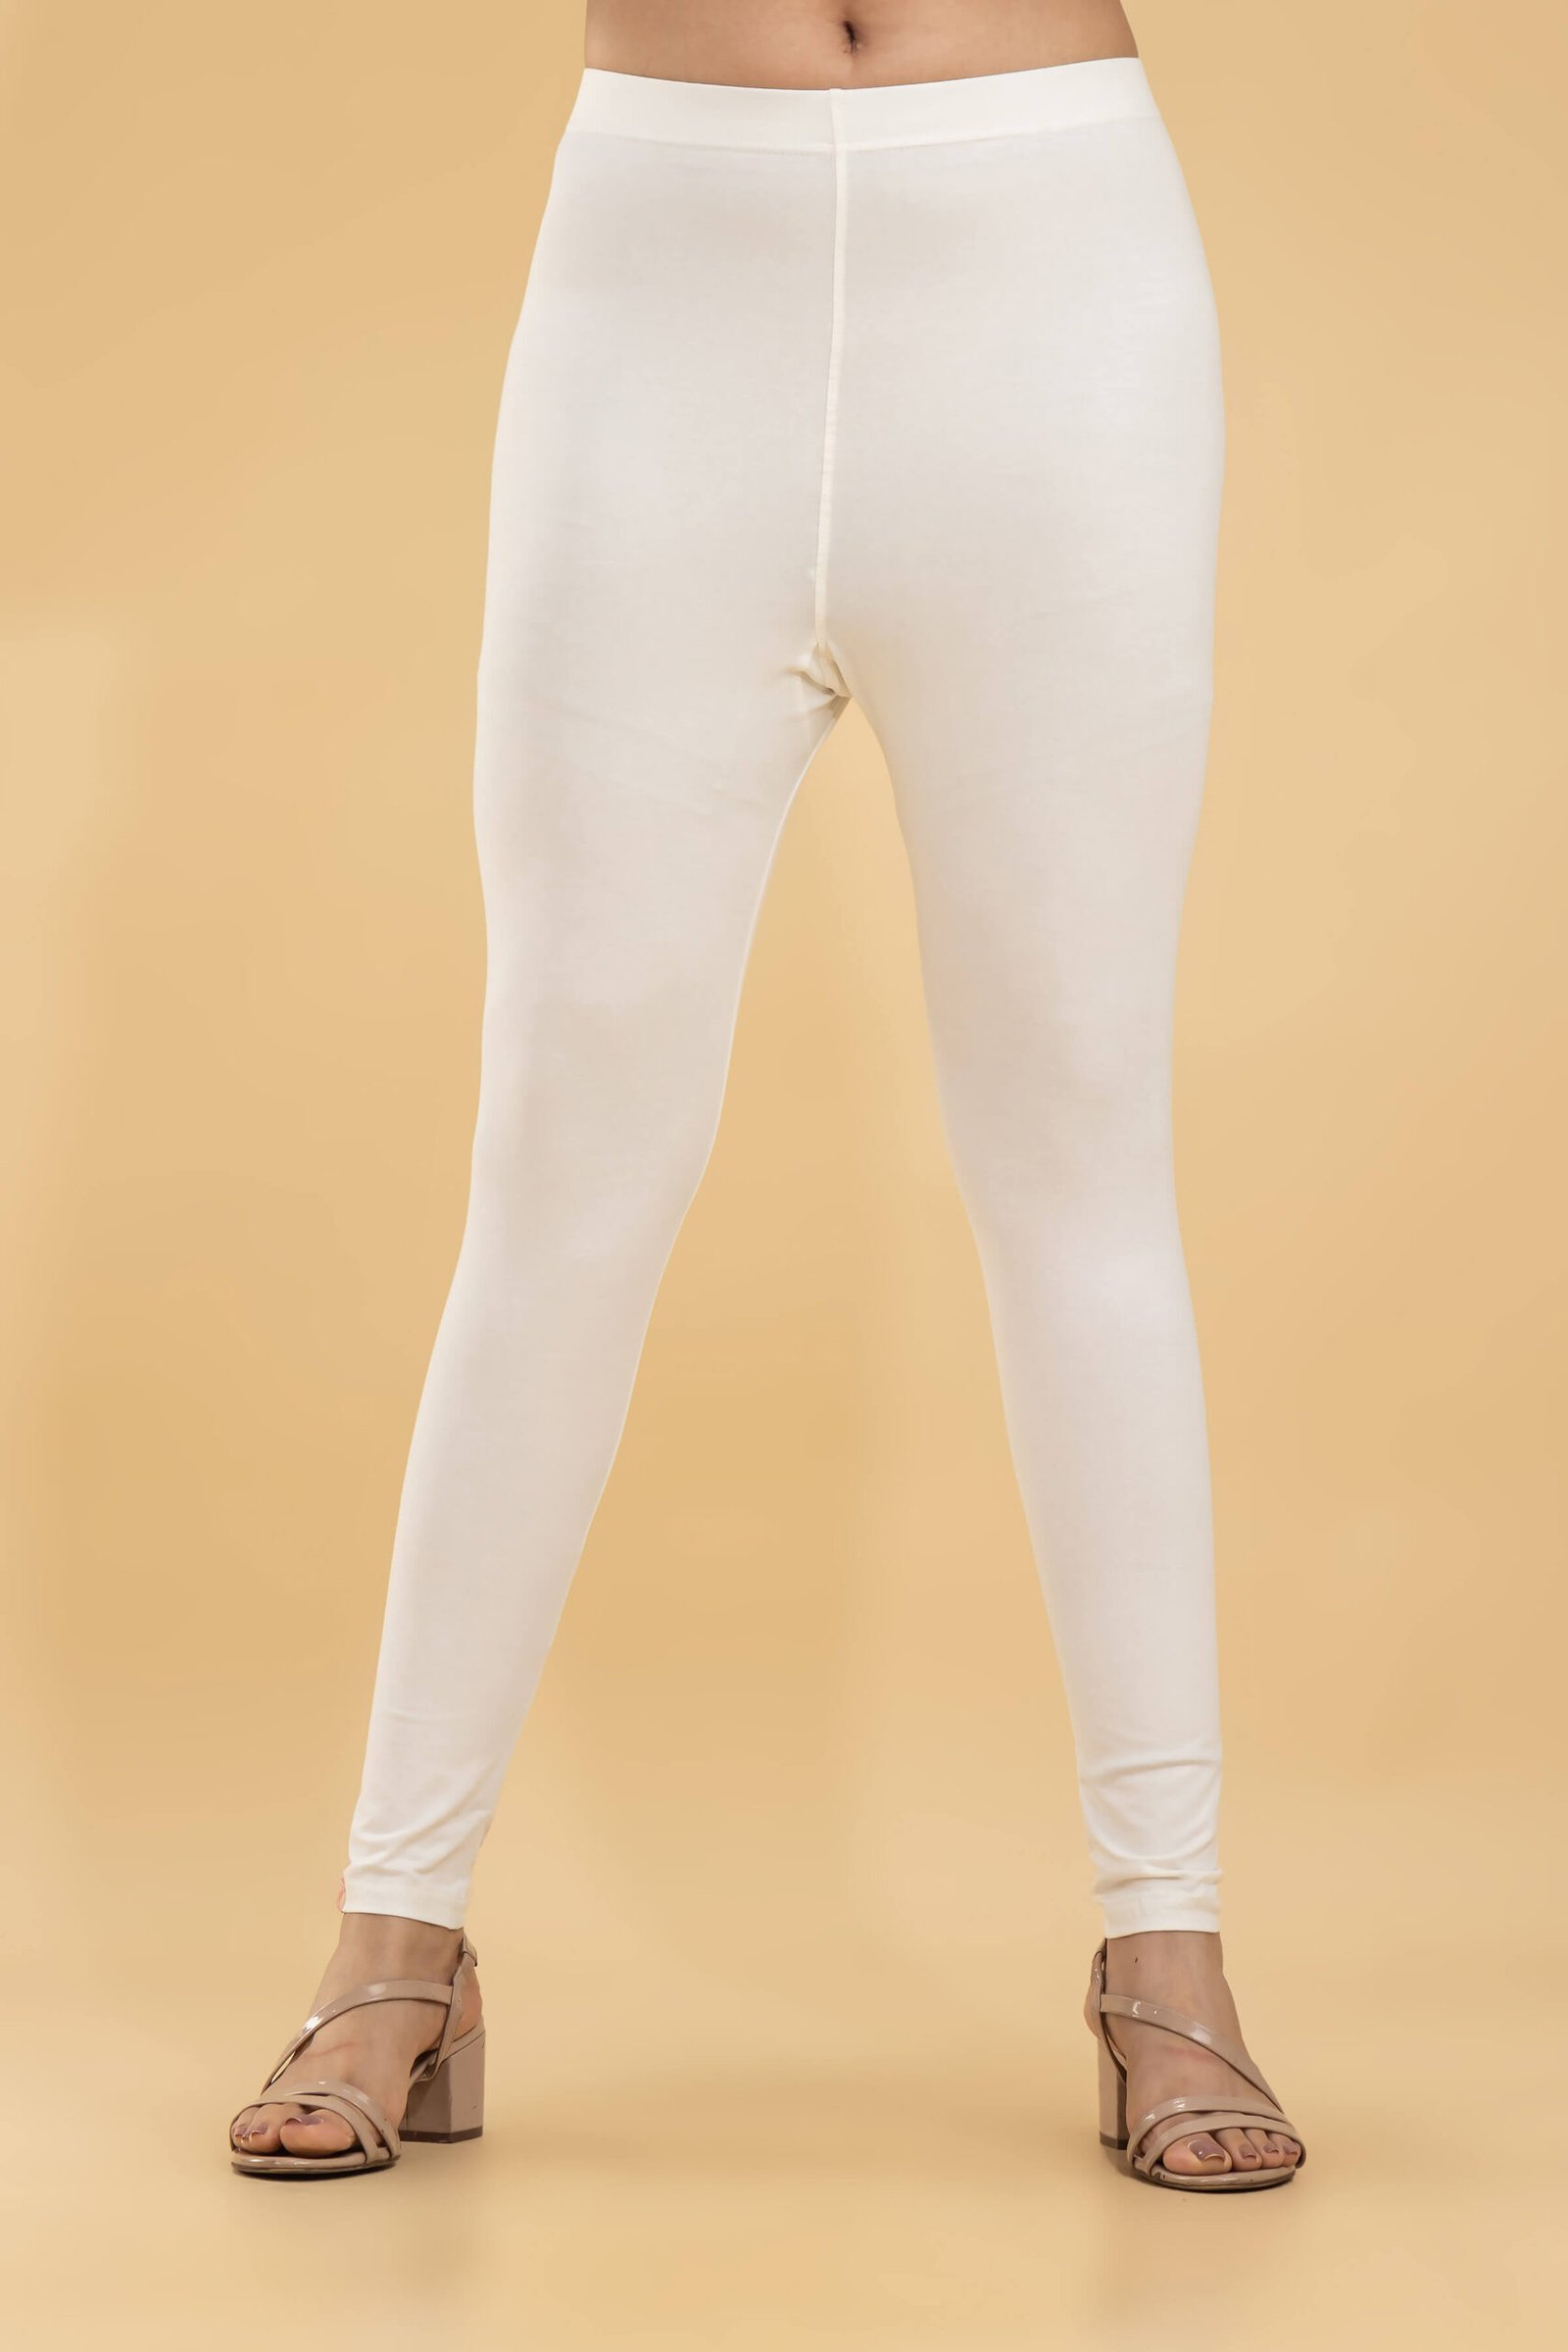 Buy Women's Premium Cotton Lycra 4 Way Stretchable Leggings Combo Pack of 2  White and Blue at